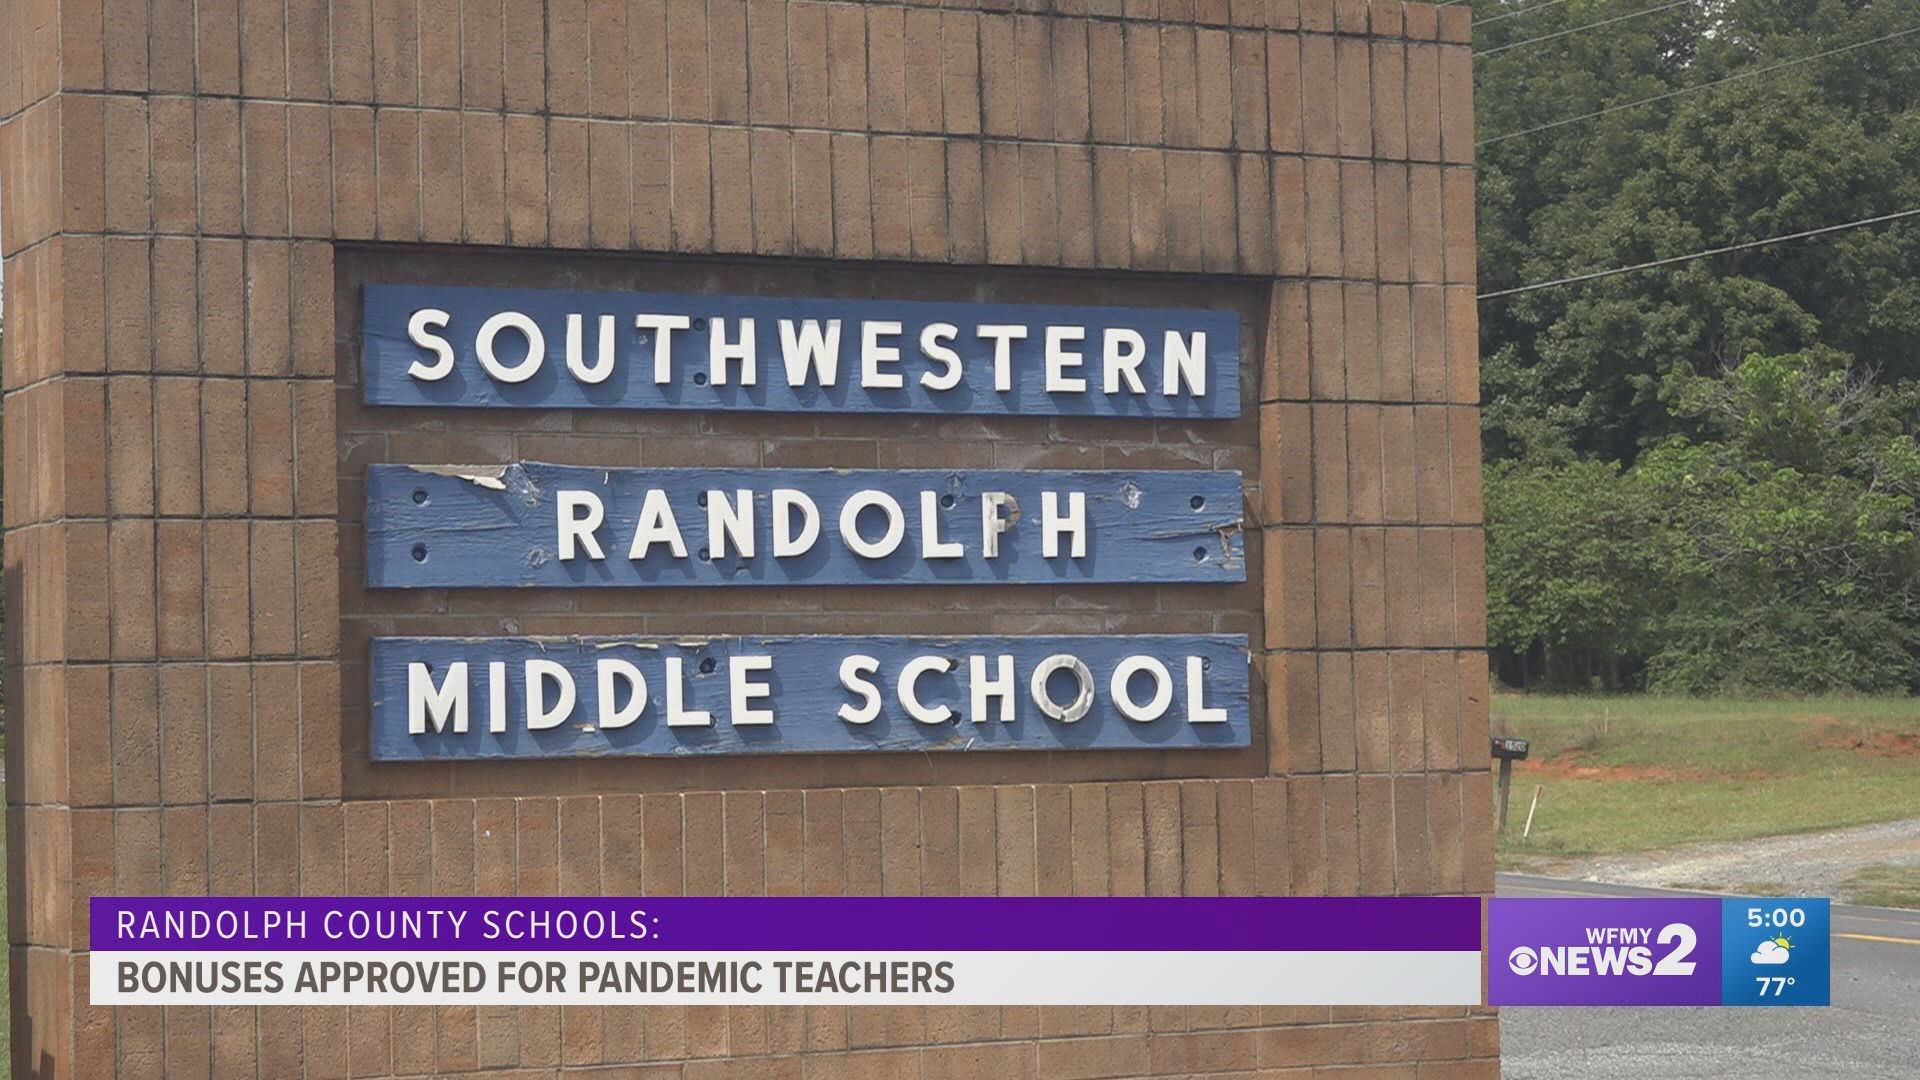 Full-time teachers can earn $5,000 for their work during the pandemic.